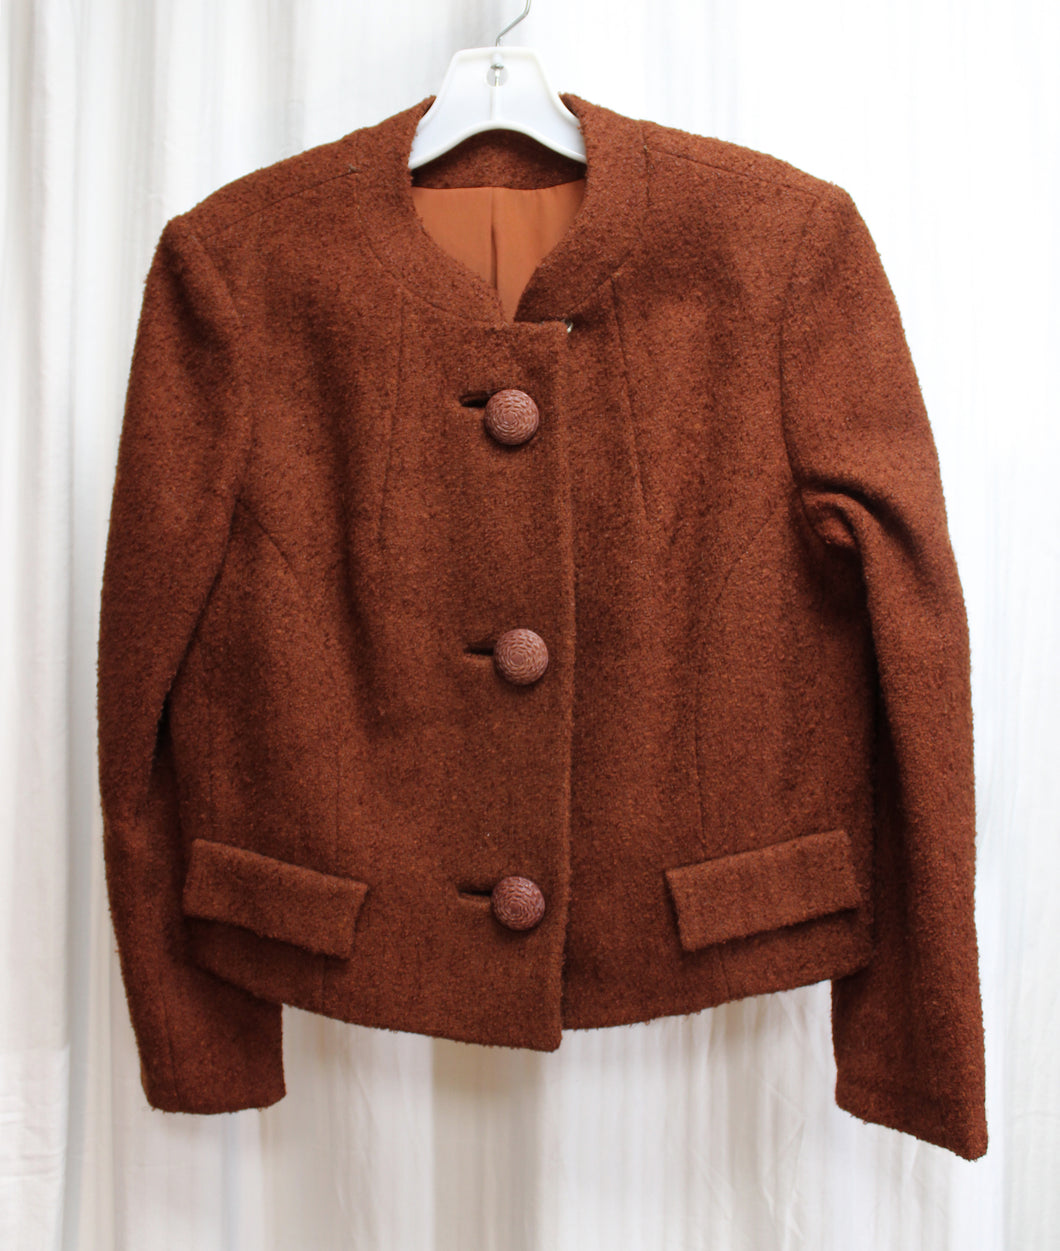 Vintage 1960's - Suburban Miss - Brown Wool Textured Jacket - Size S (Approx, See Measurements)